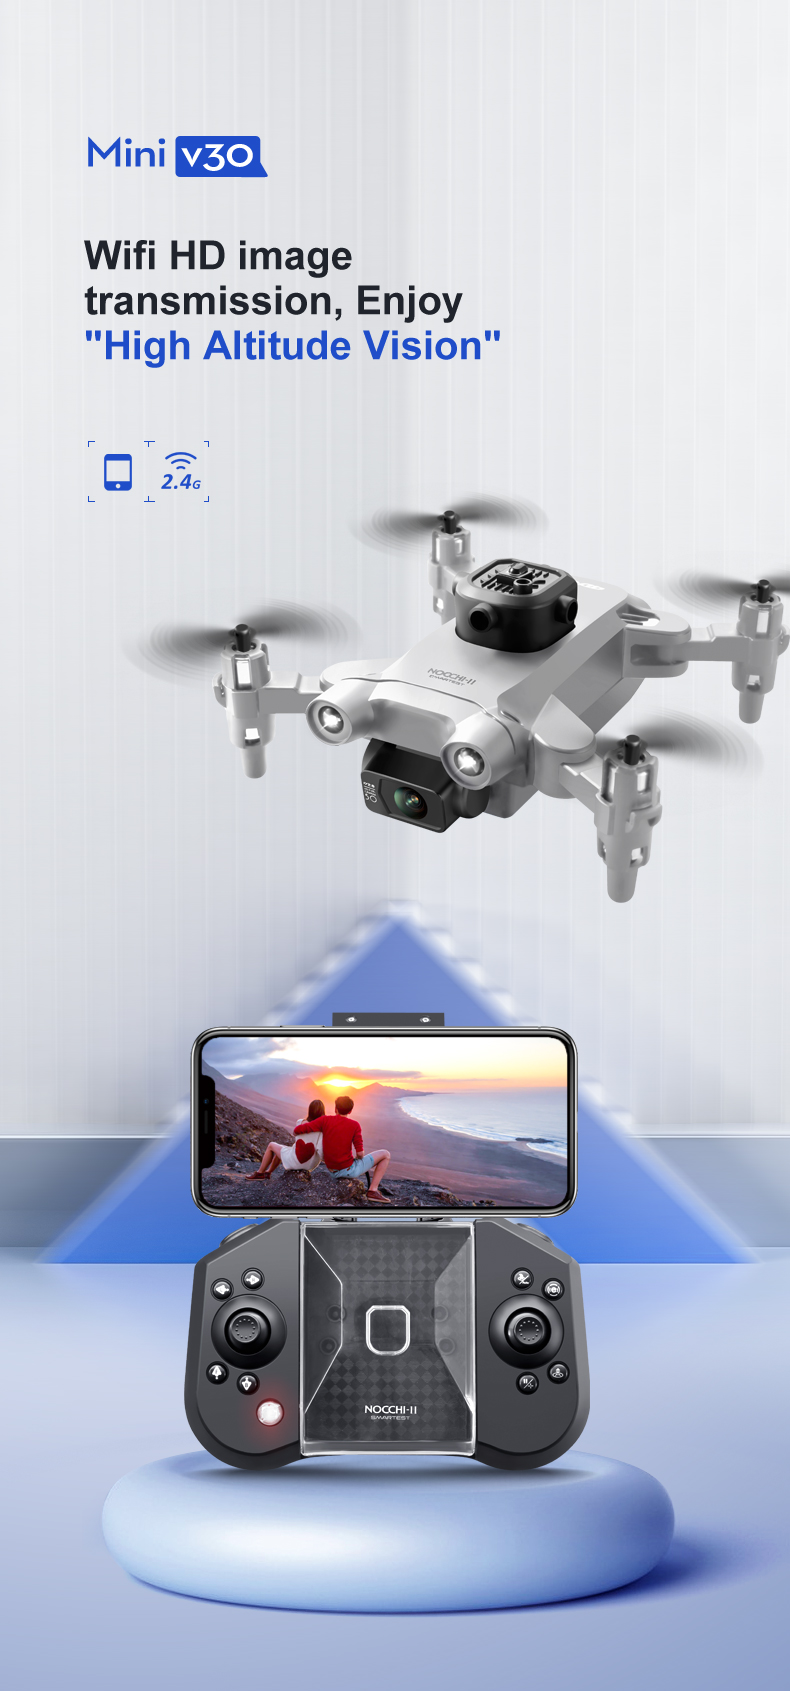 4DRC V30 Mini WiFi FPV with 8K HD Dual Camera 5-Sided Infrared Obstacle Avoidance Integrated Storage Foldable RC Drone Quadcopter RTF